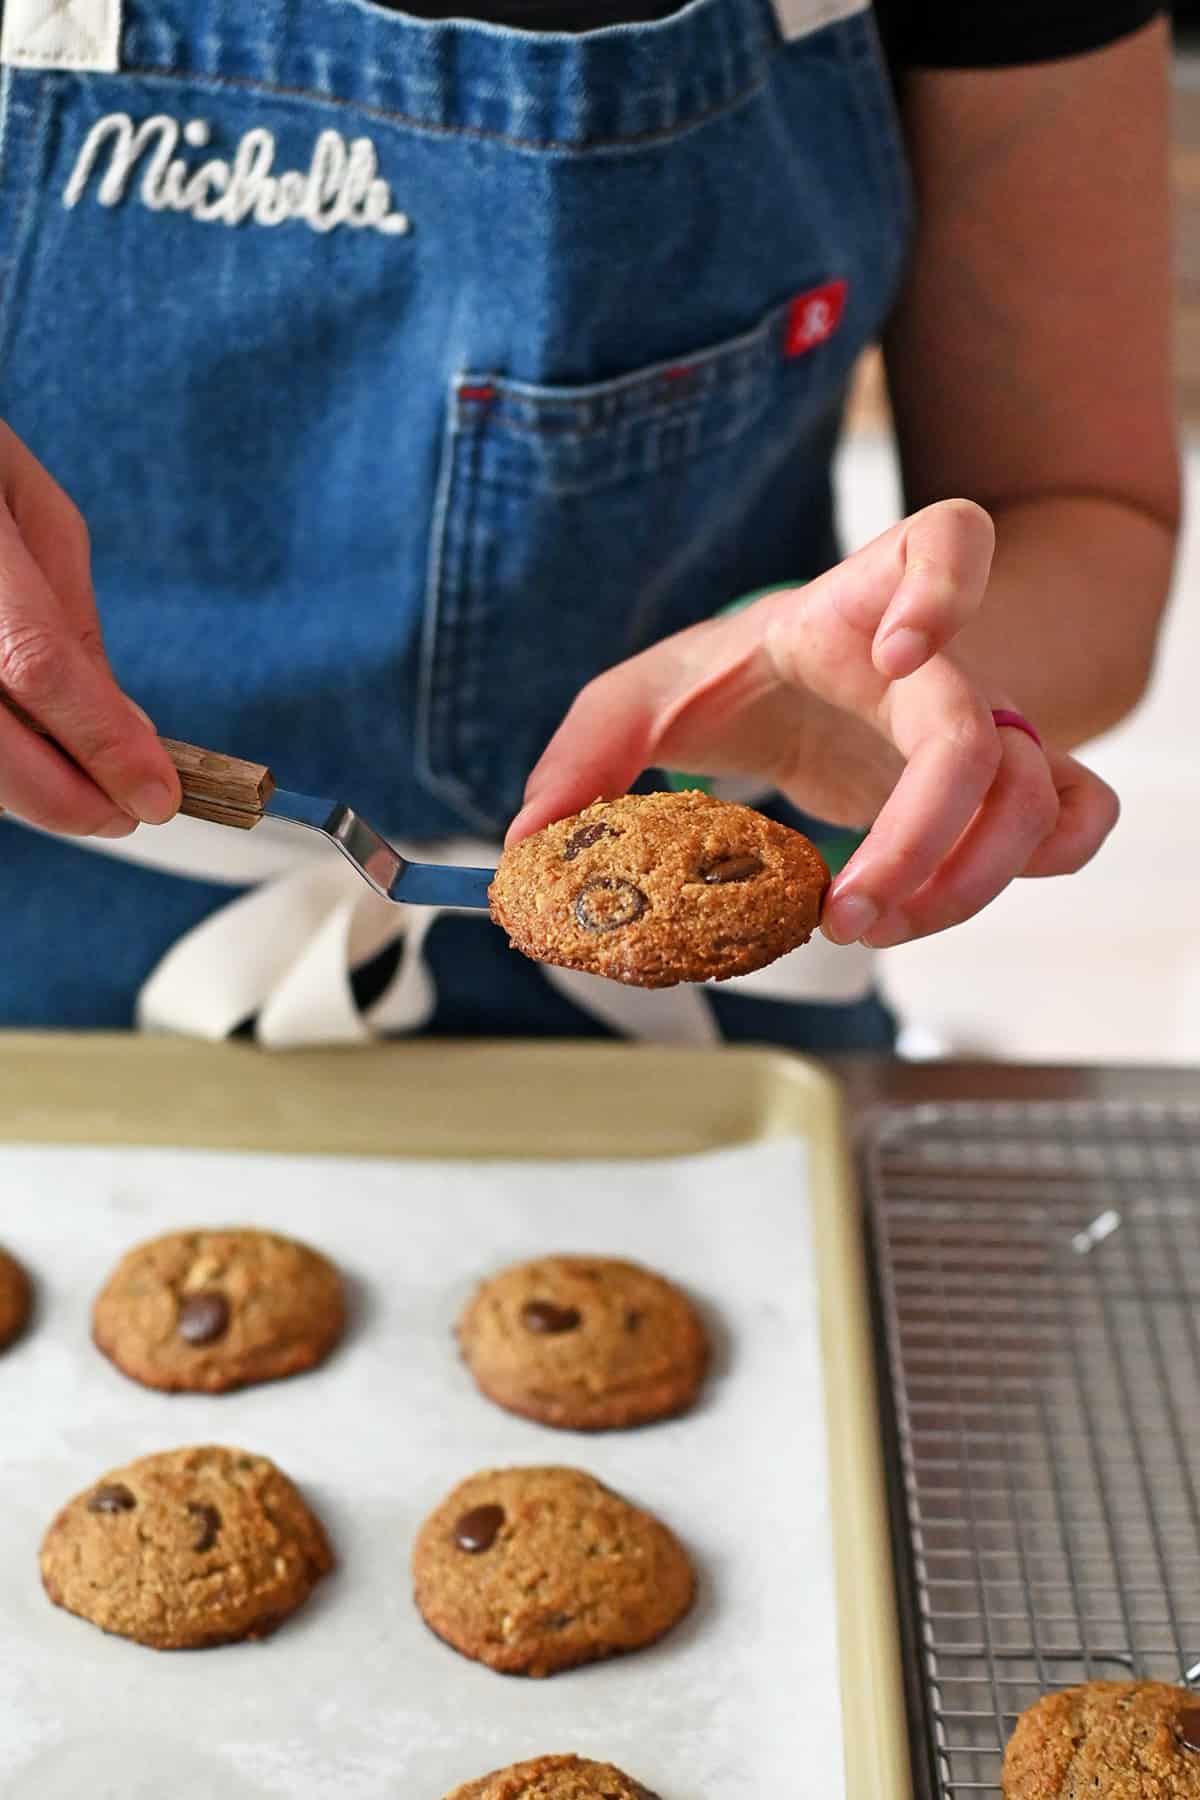 A person in a blue apron is using a small offset spatula to transfer freshly baked paleo banana cookies from a baking pan to a wire cooling rack,